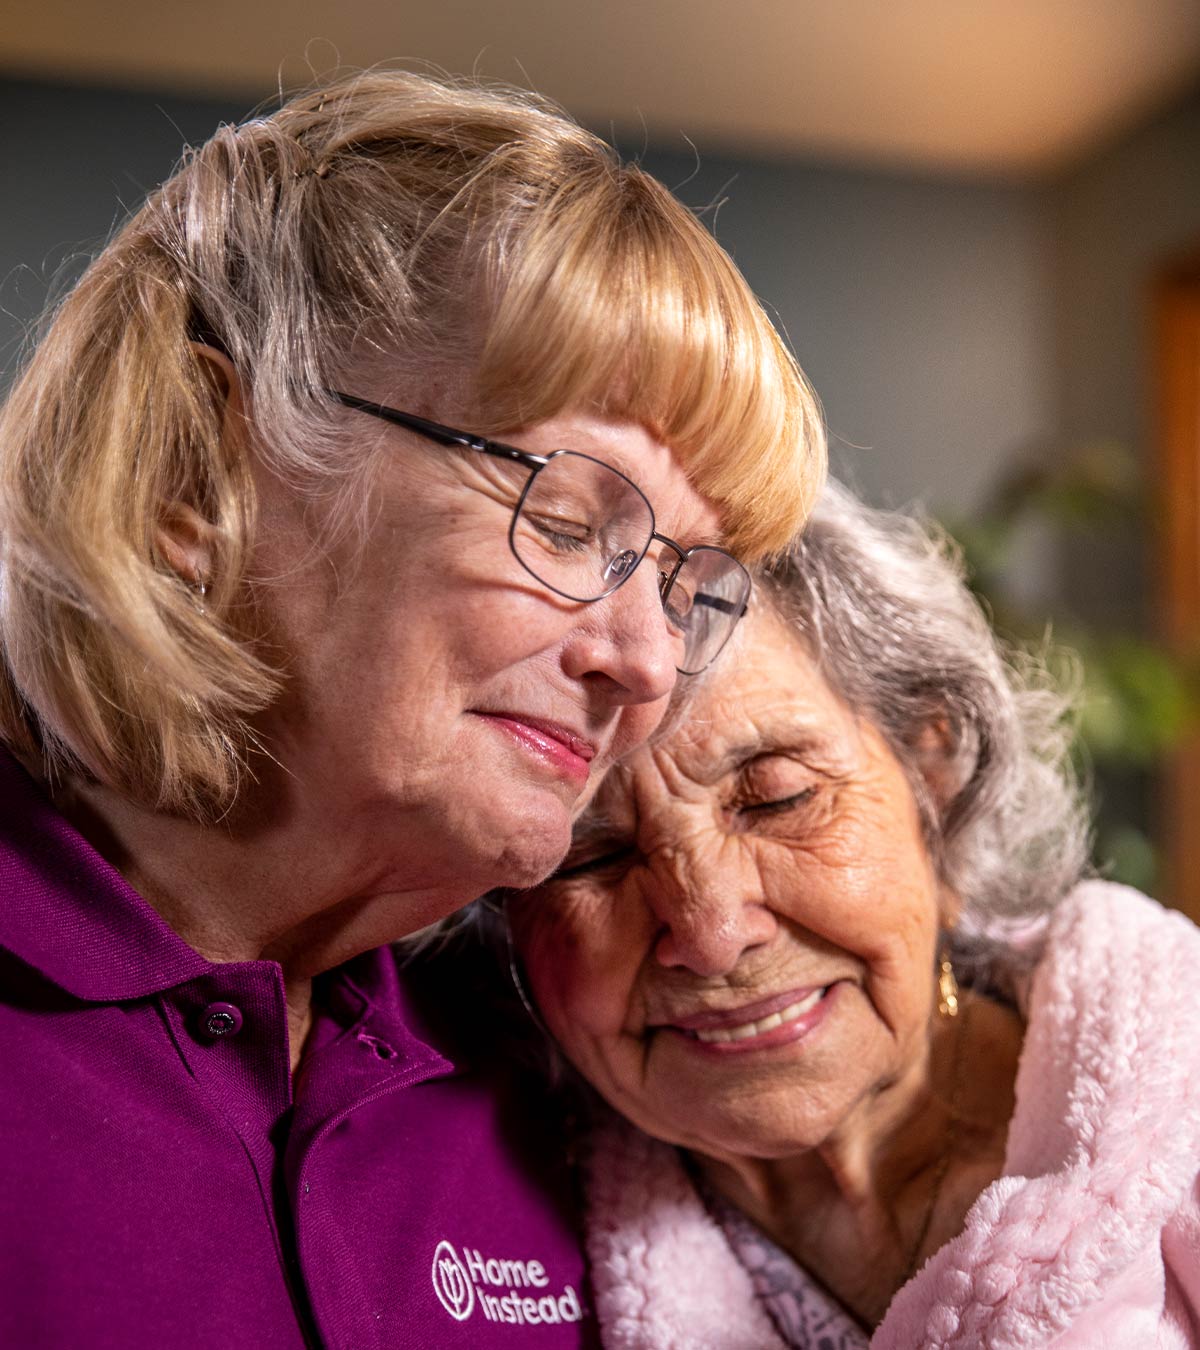 CAREGiver providing in-home senior care services. Home Instead of Toronto, ON provides Elder Care to aging adults. 